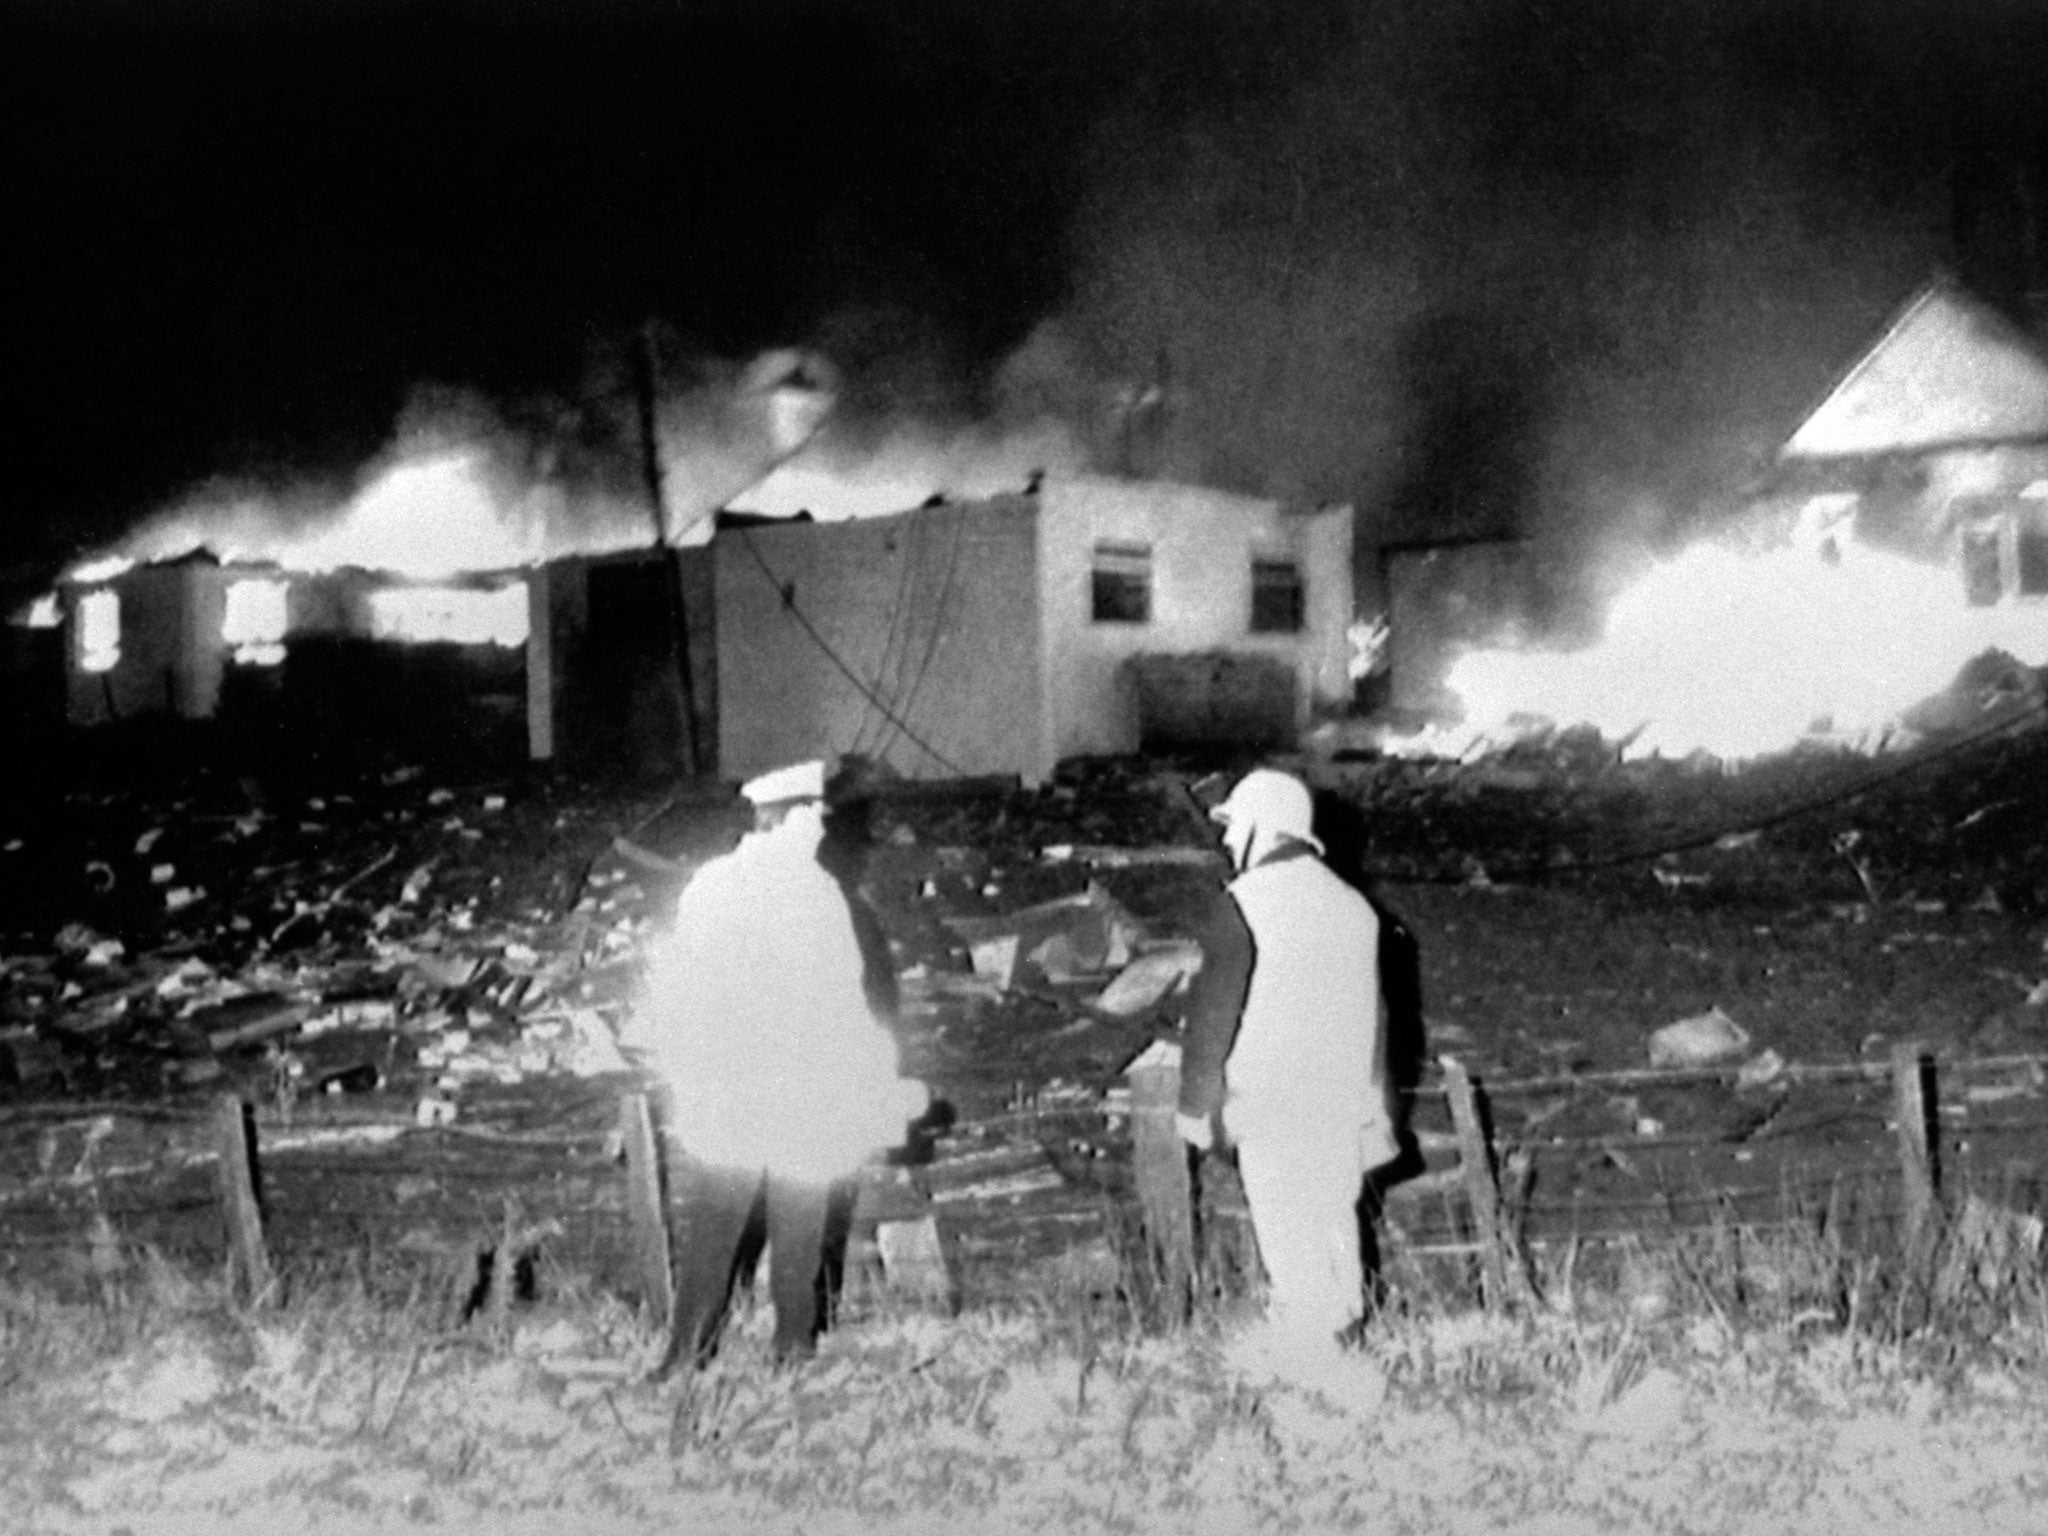 21 December 1988: Houses on fire in Lockerbie, Scotland, after a Boeing 747 aeroplane, Pan Am Flight 103, crashed after a mid-flight explosion on board - according to a new investigation, the US knew of other suspects